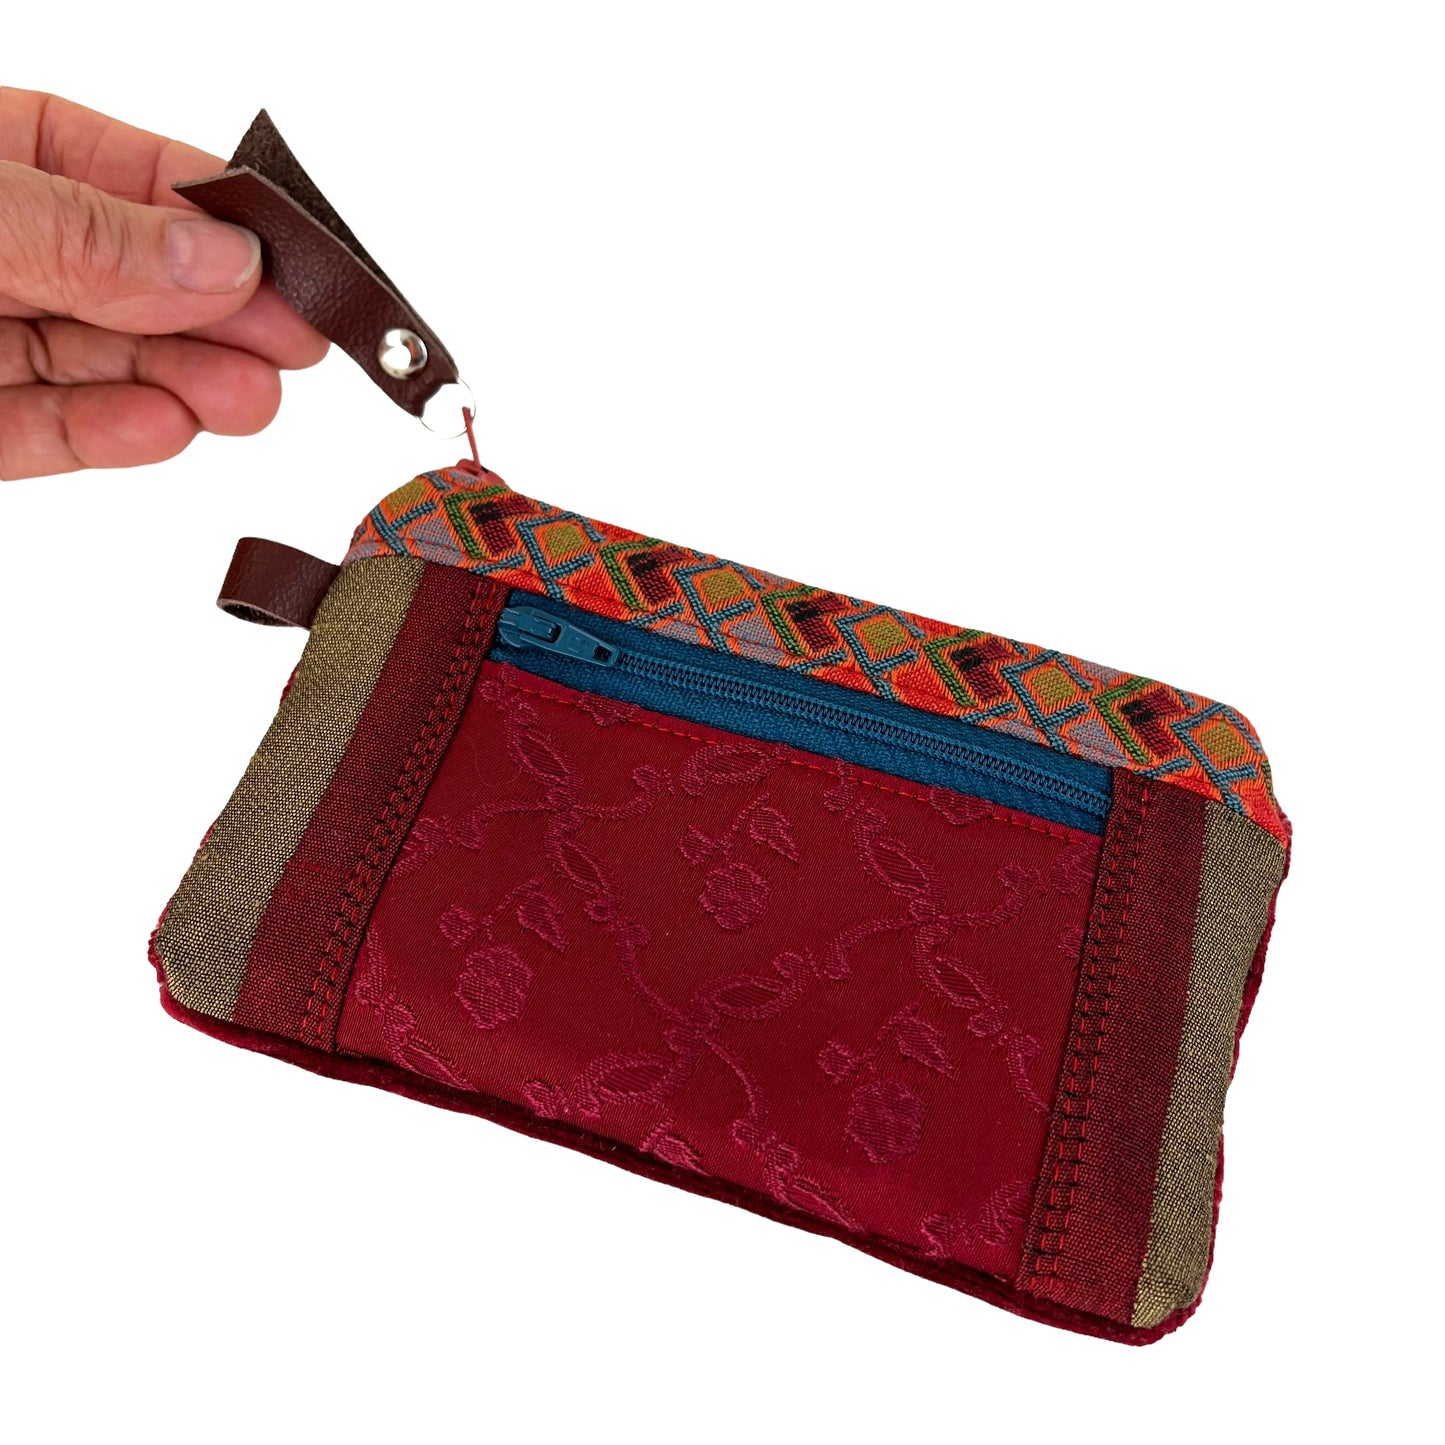 Small Zipper Card Tapestry Wallet Red Orange Teal Patchwork